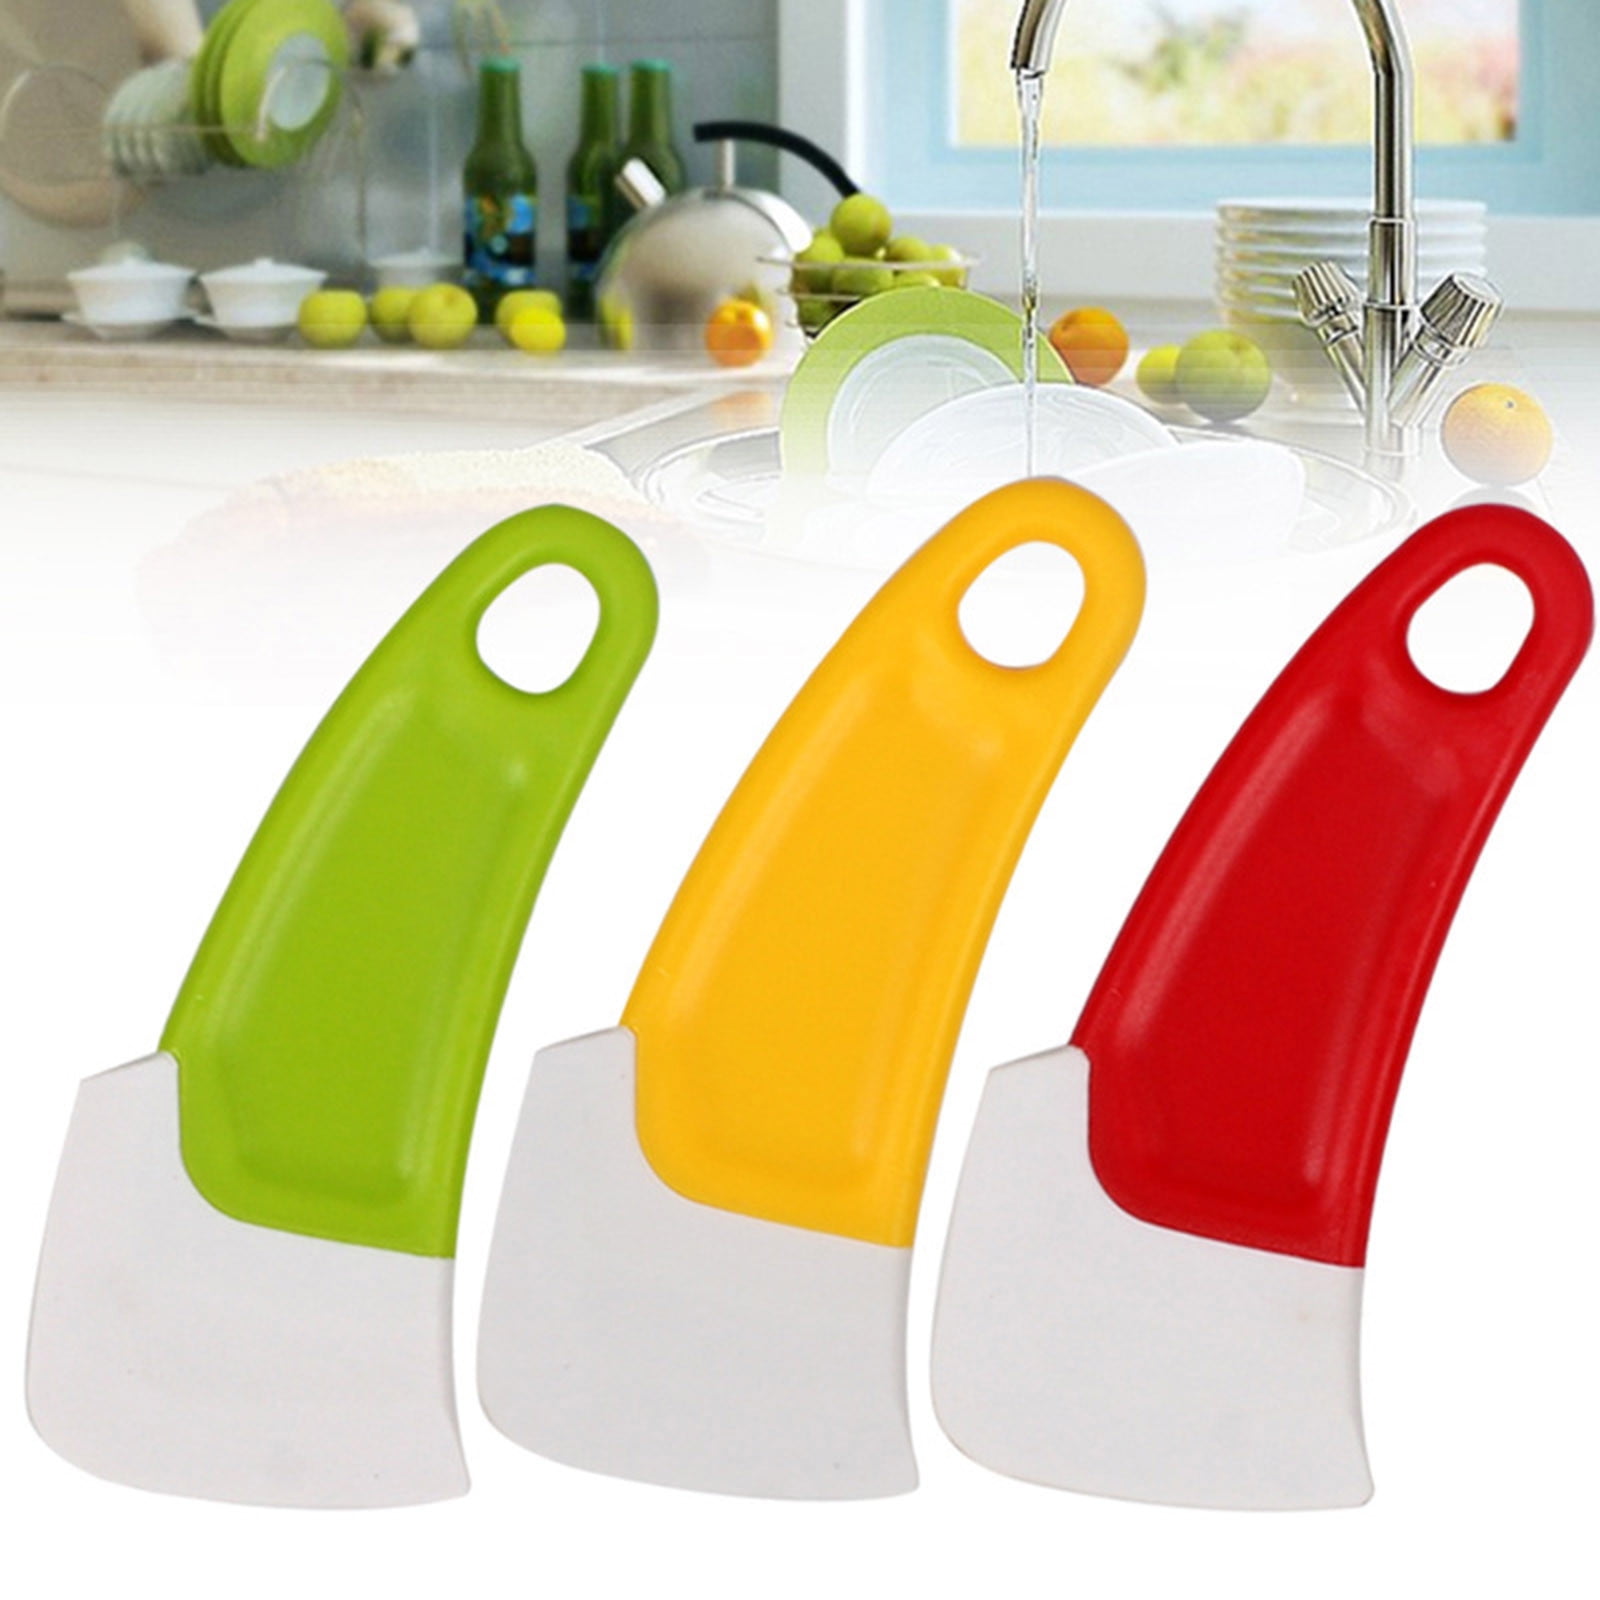 AIEOTT Household Pots Pans Dishes Grease Heat Resistant Cleaning Flexible  Thicker Scraper Clean Spatula Plastic Pan Scraper Tools For Iron Skillets